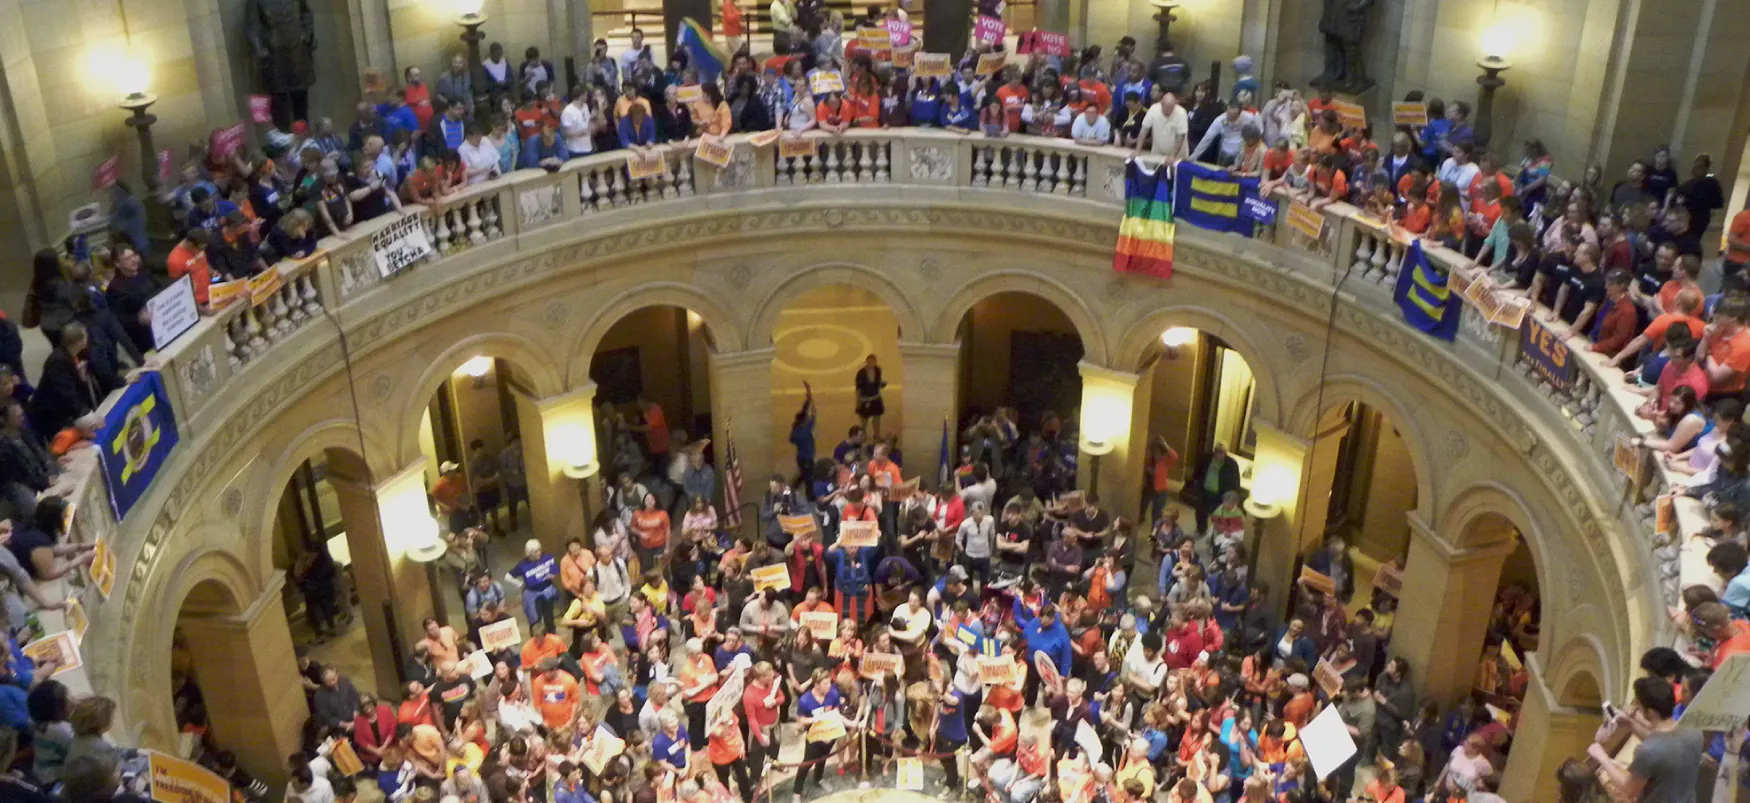 A large crowd of people pack two floors of a rotunda. Some hold rainbow flags or flags bearing an equals sign.